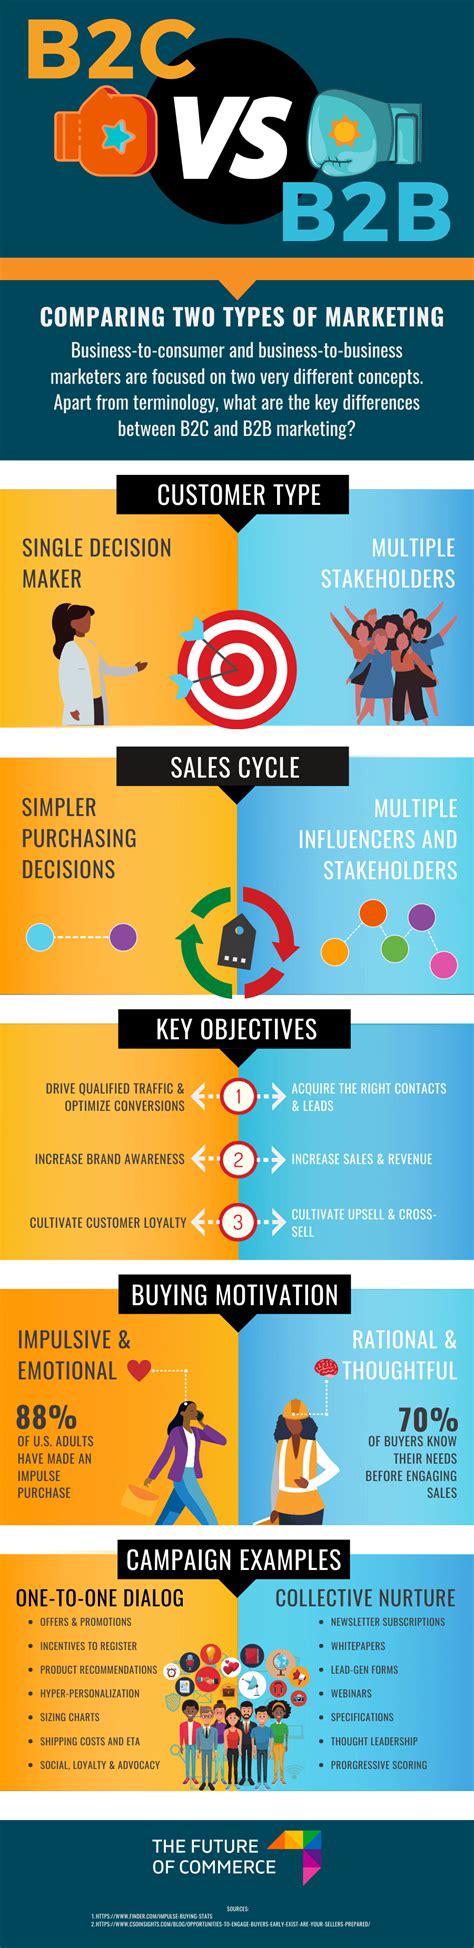 B2c Vs B2b Marketing An Infographic Primer With Stats And Examples